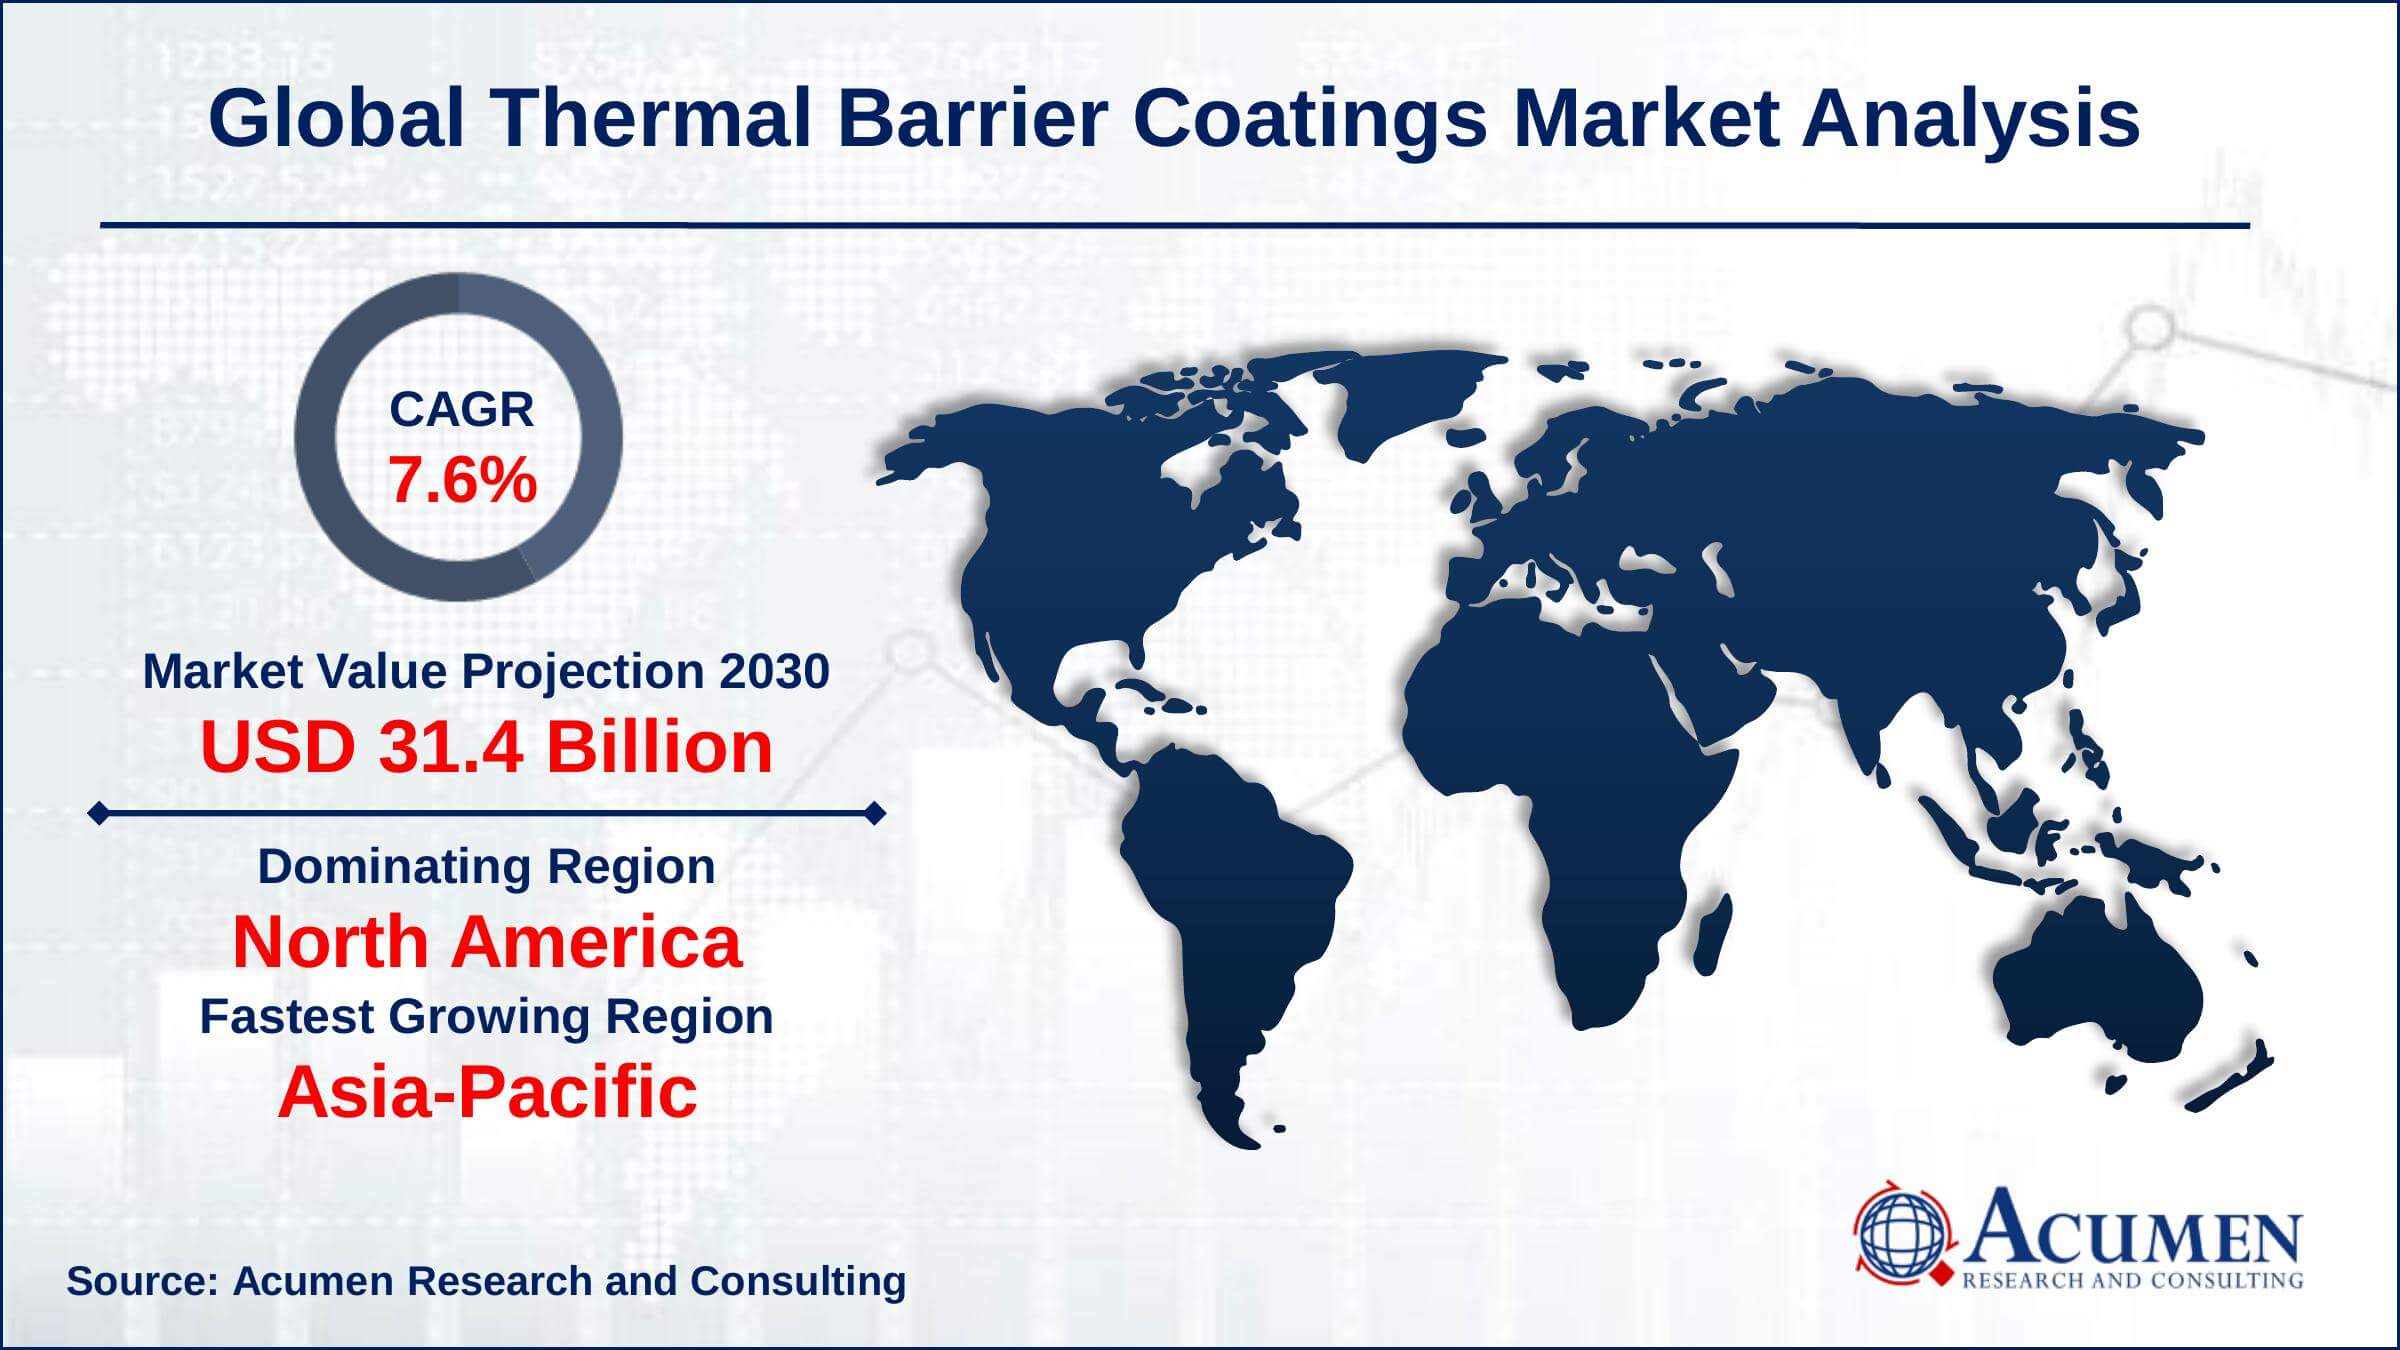 Asia-Pacific thermal barrier coatings market growth will record noteworthy CAGR of over 8.5% from 2022 to 2030